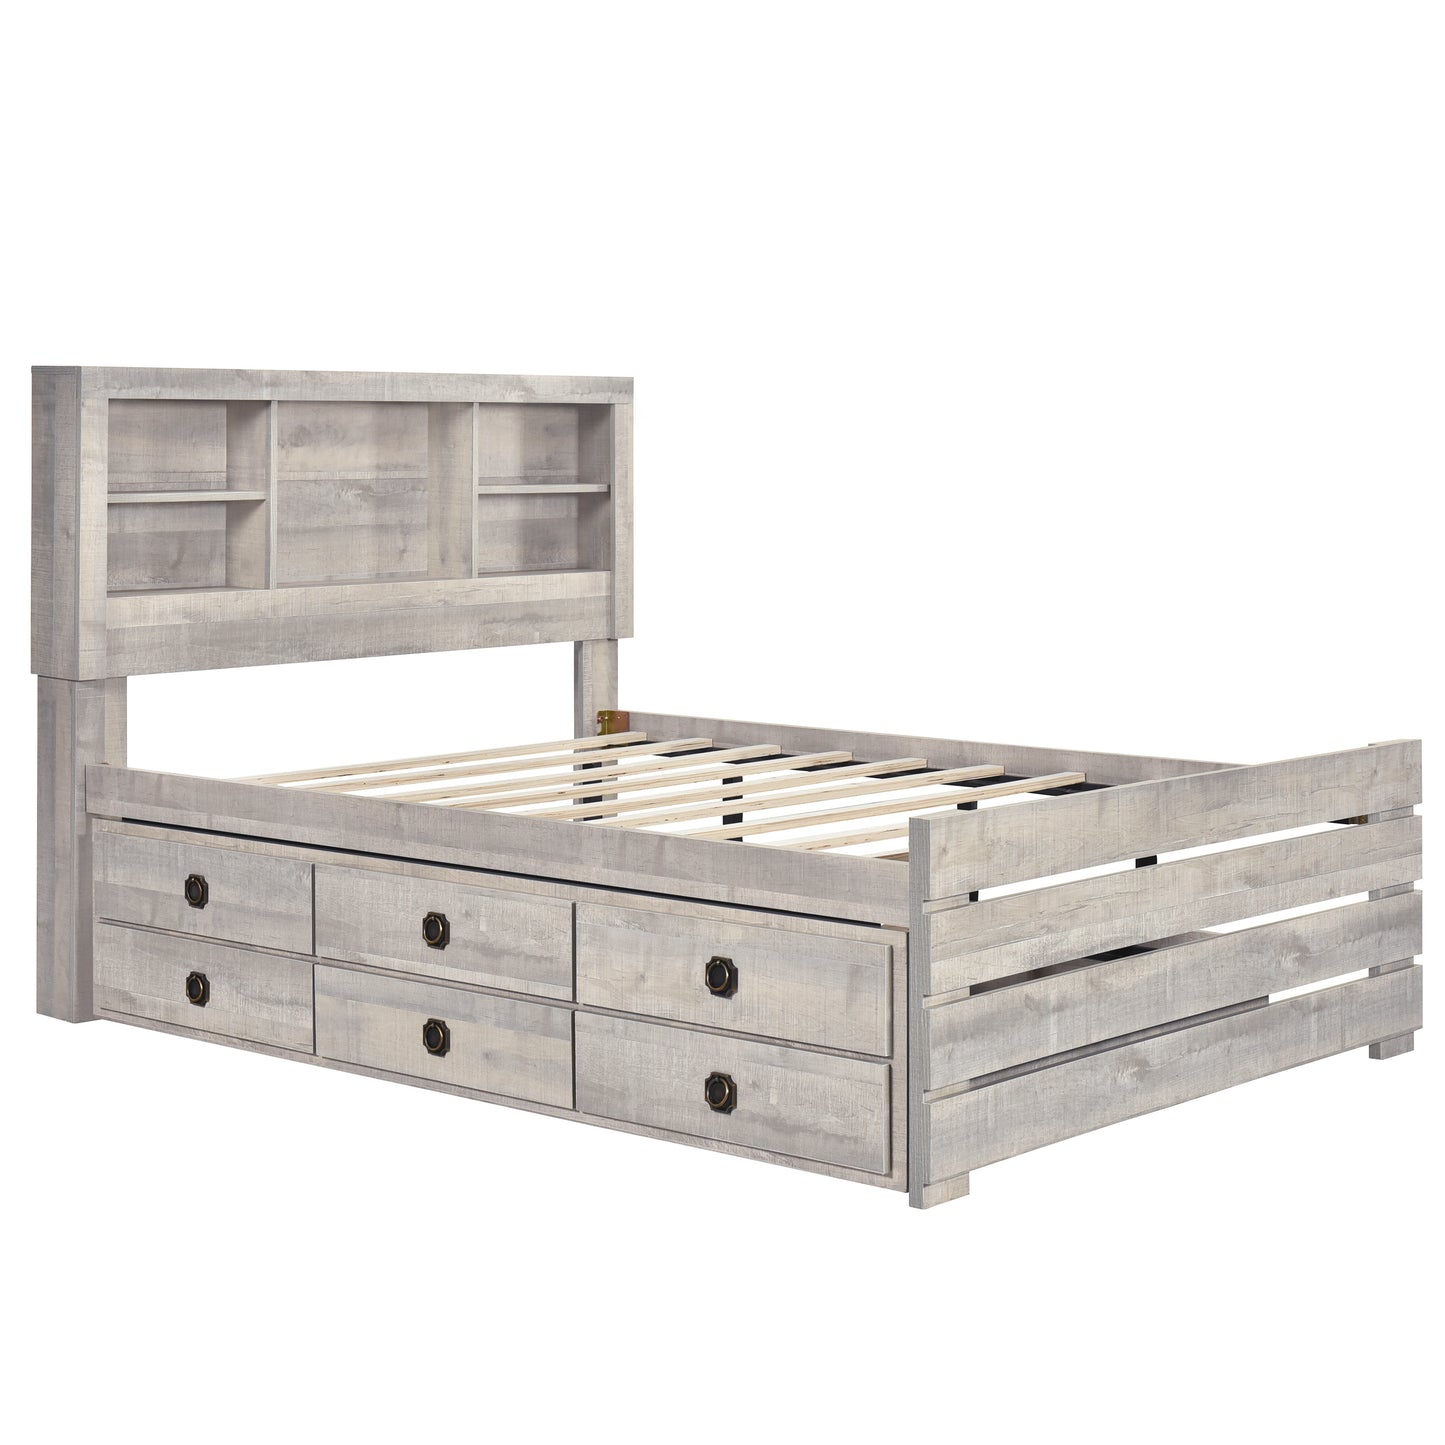 Brazen Farmhouse Style Full Size Bookcase Captain Bed and Nightstand in Rustic White